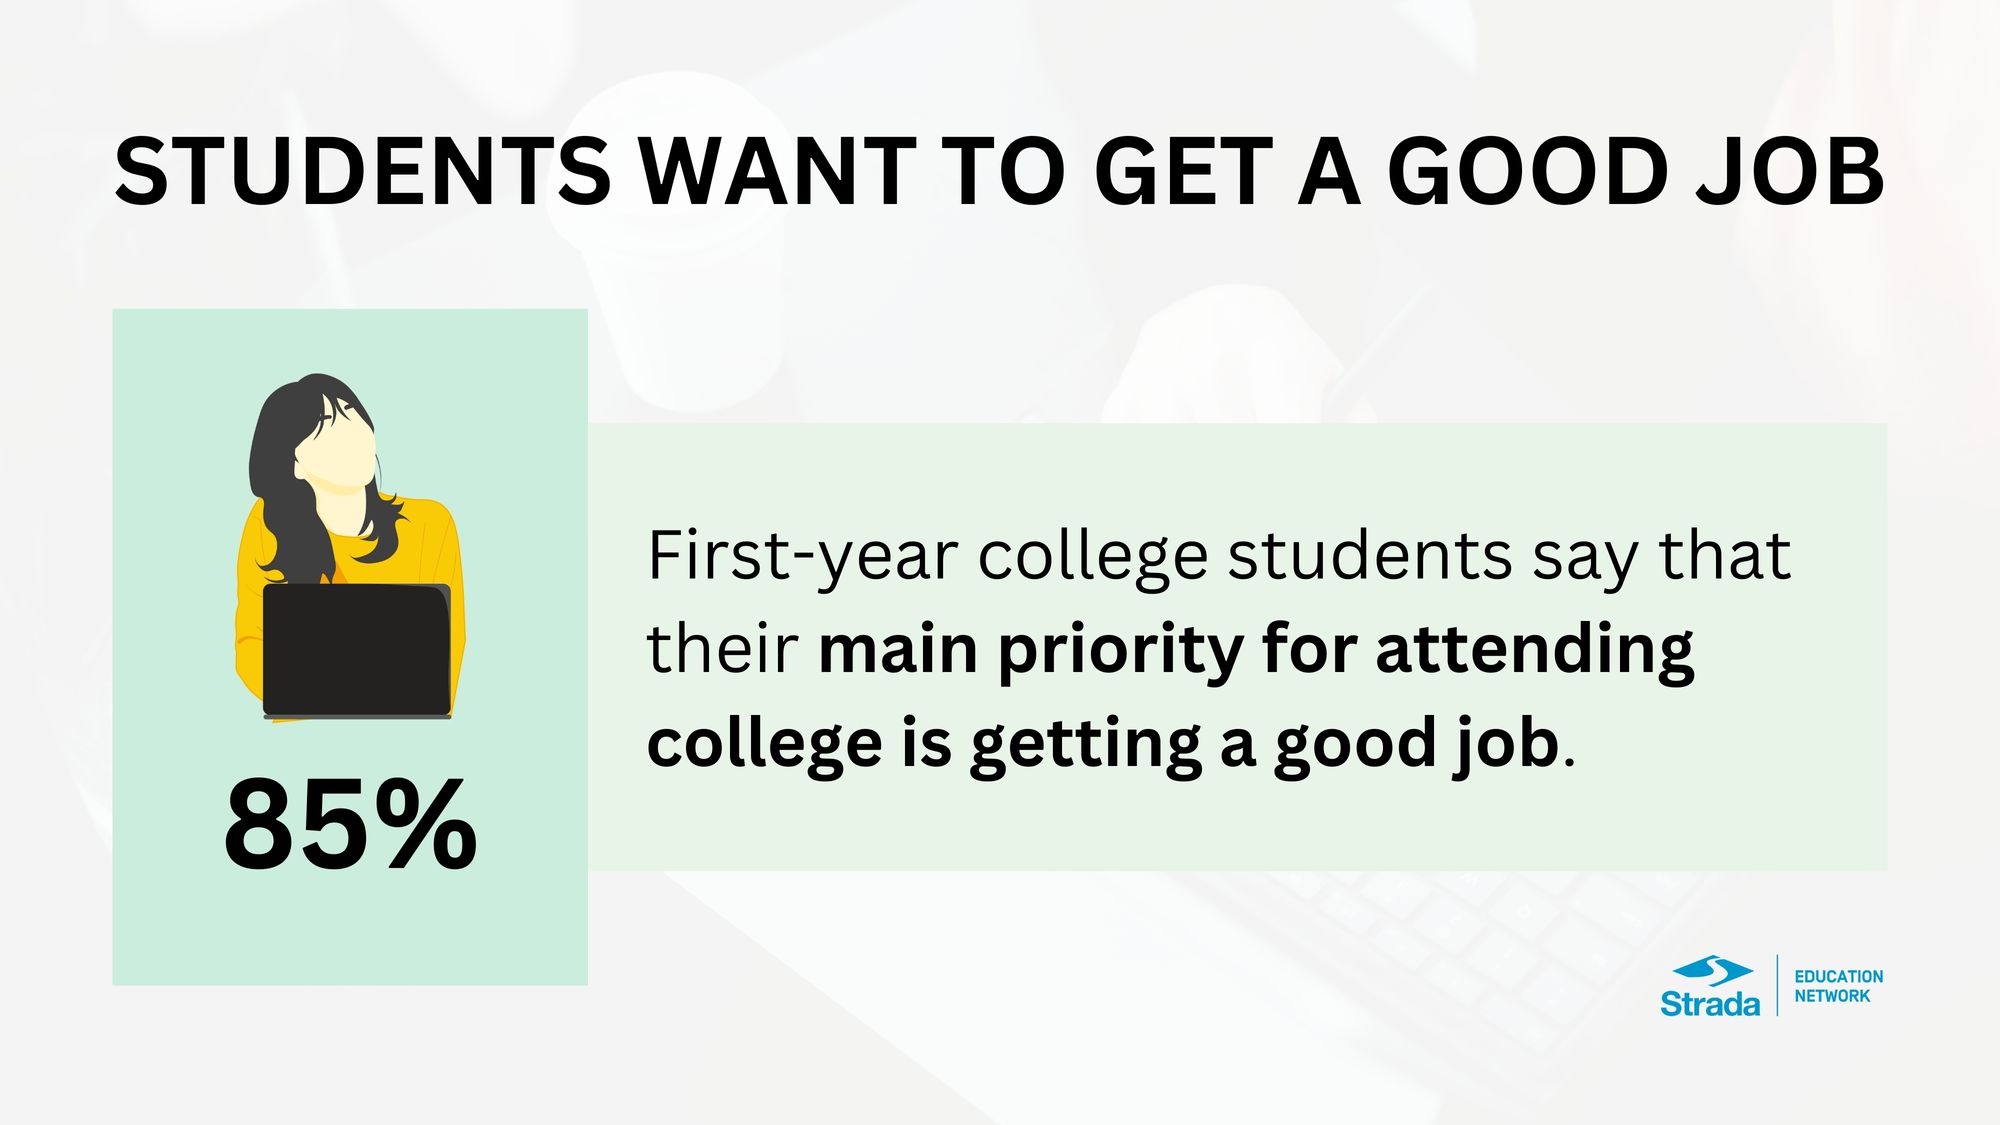 Infographic showing 85% of first-year college students say their main priority is getting a good job.